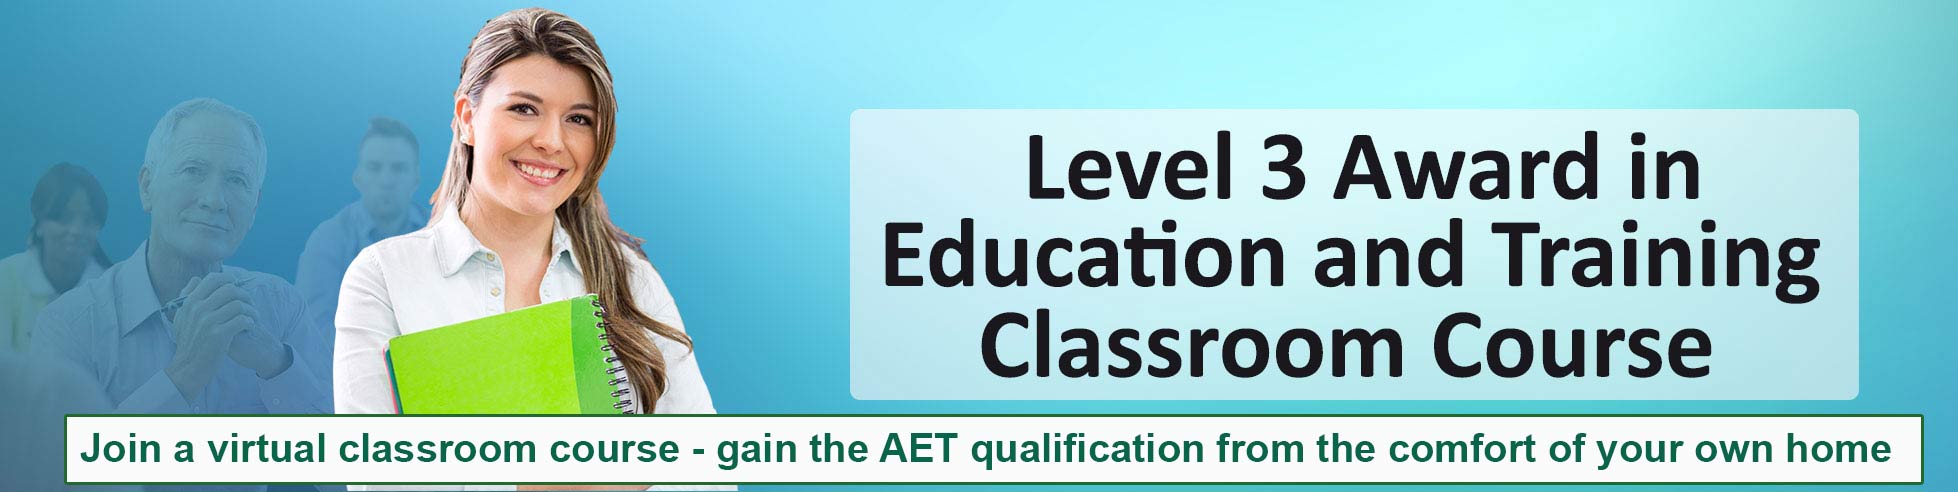 level 3 award in education and training classroom course